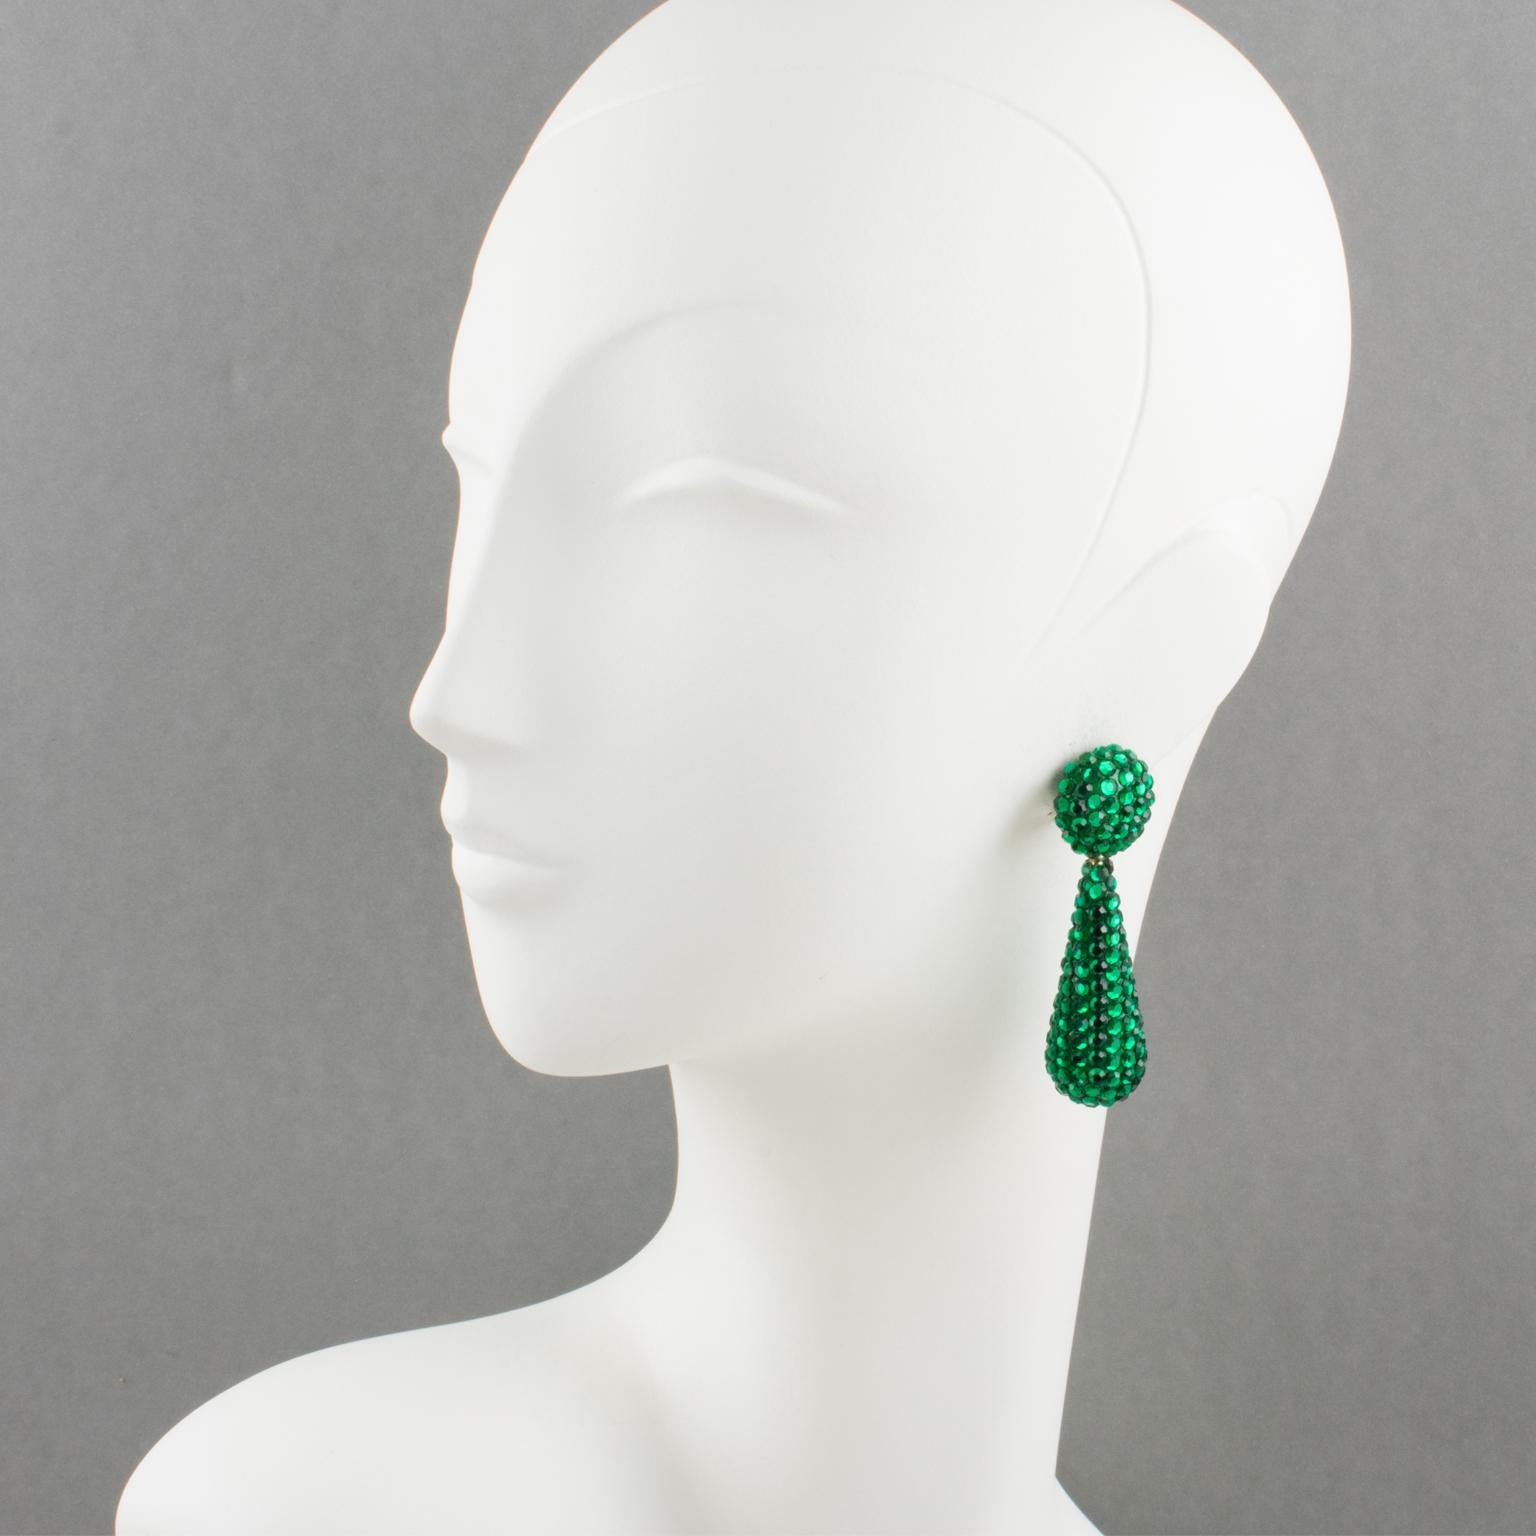 Gorgeous statement clip-on earrings designed by Richard Kerr in the 1980s. They are made up of his signature pave rhinestones. Featuring dangling long teardrop shape all covered with colorful crystal rhinestones on green resin background frame.